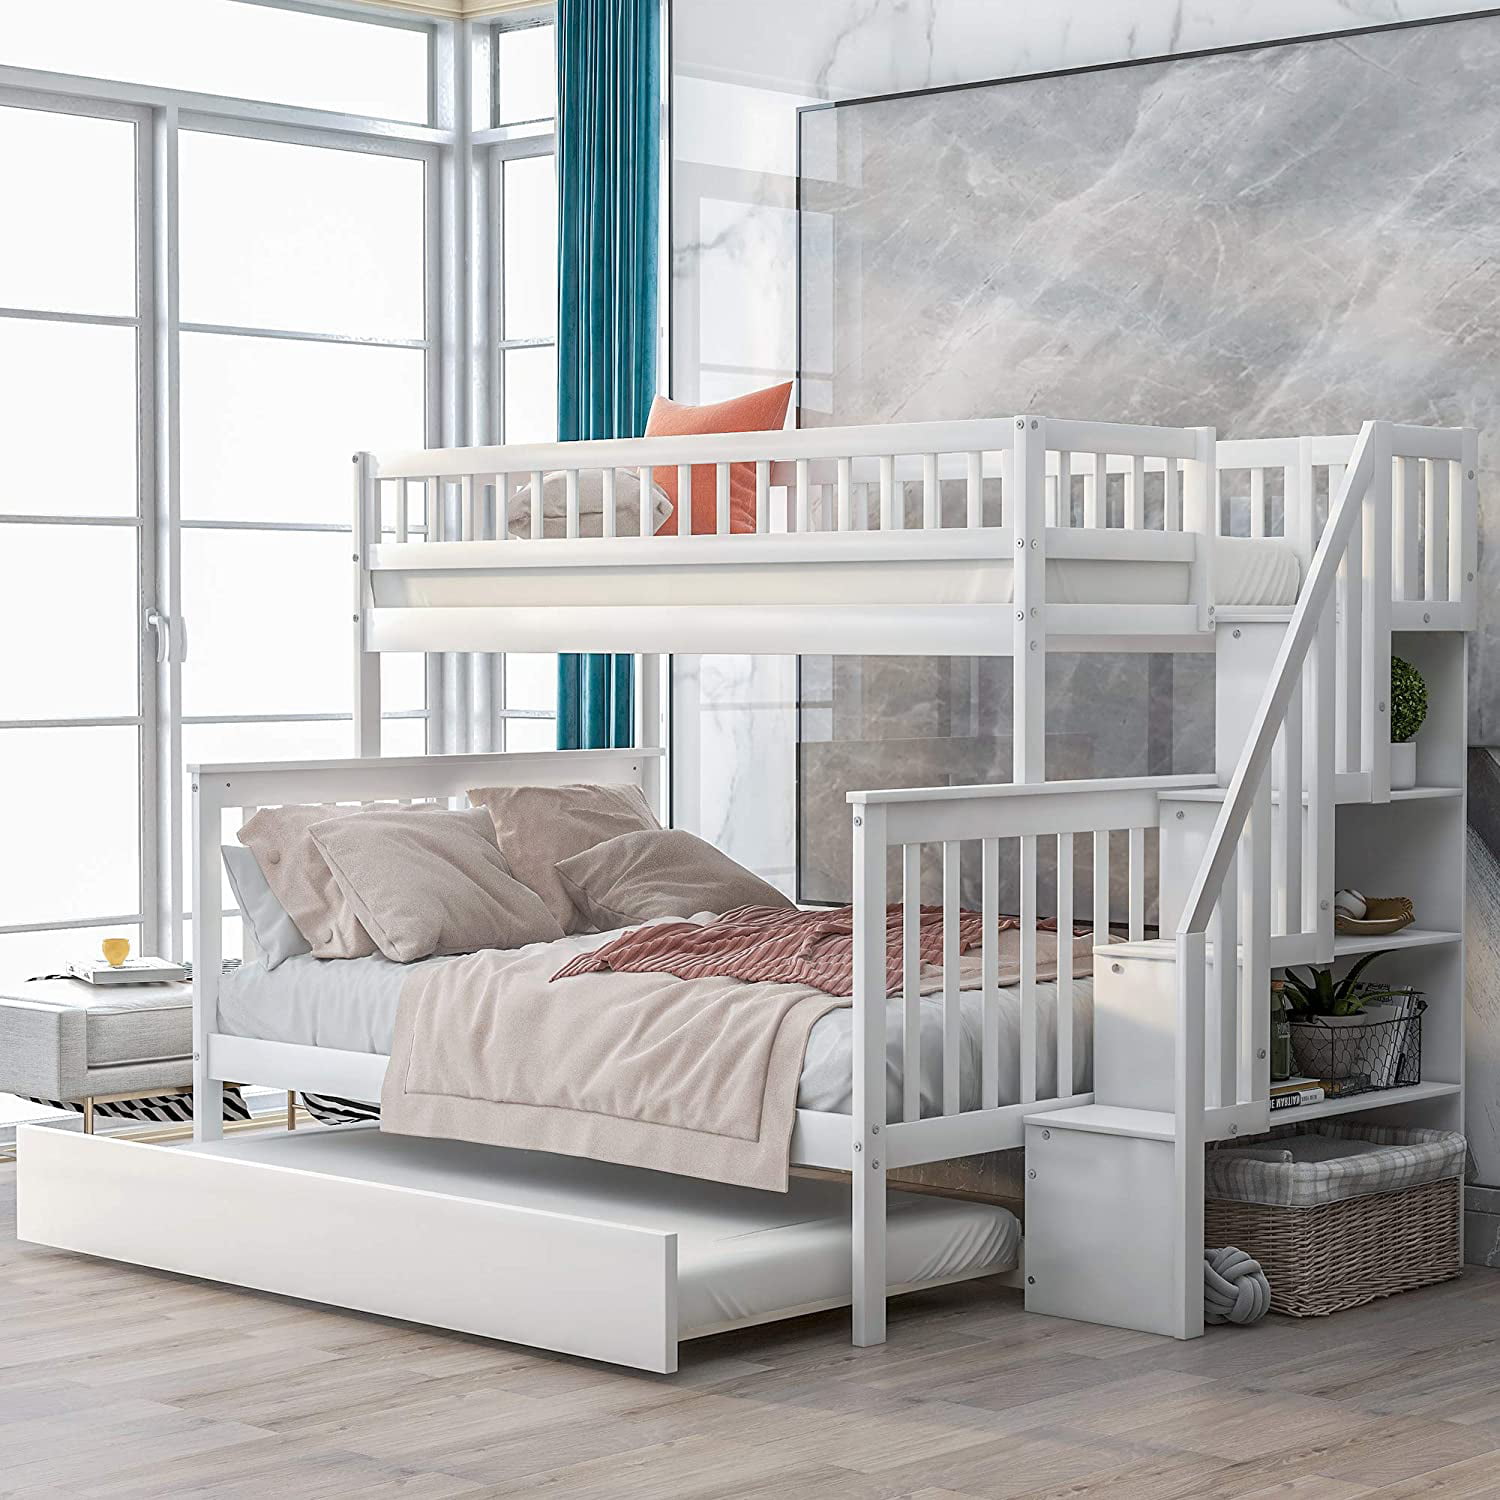 Piscis Bunk Bed Beds Twin Over, Full Size Bunk Beds With Storage